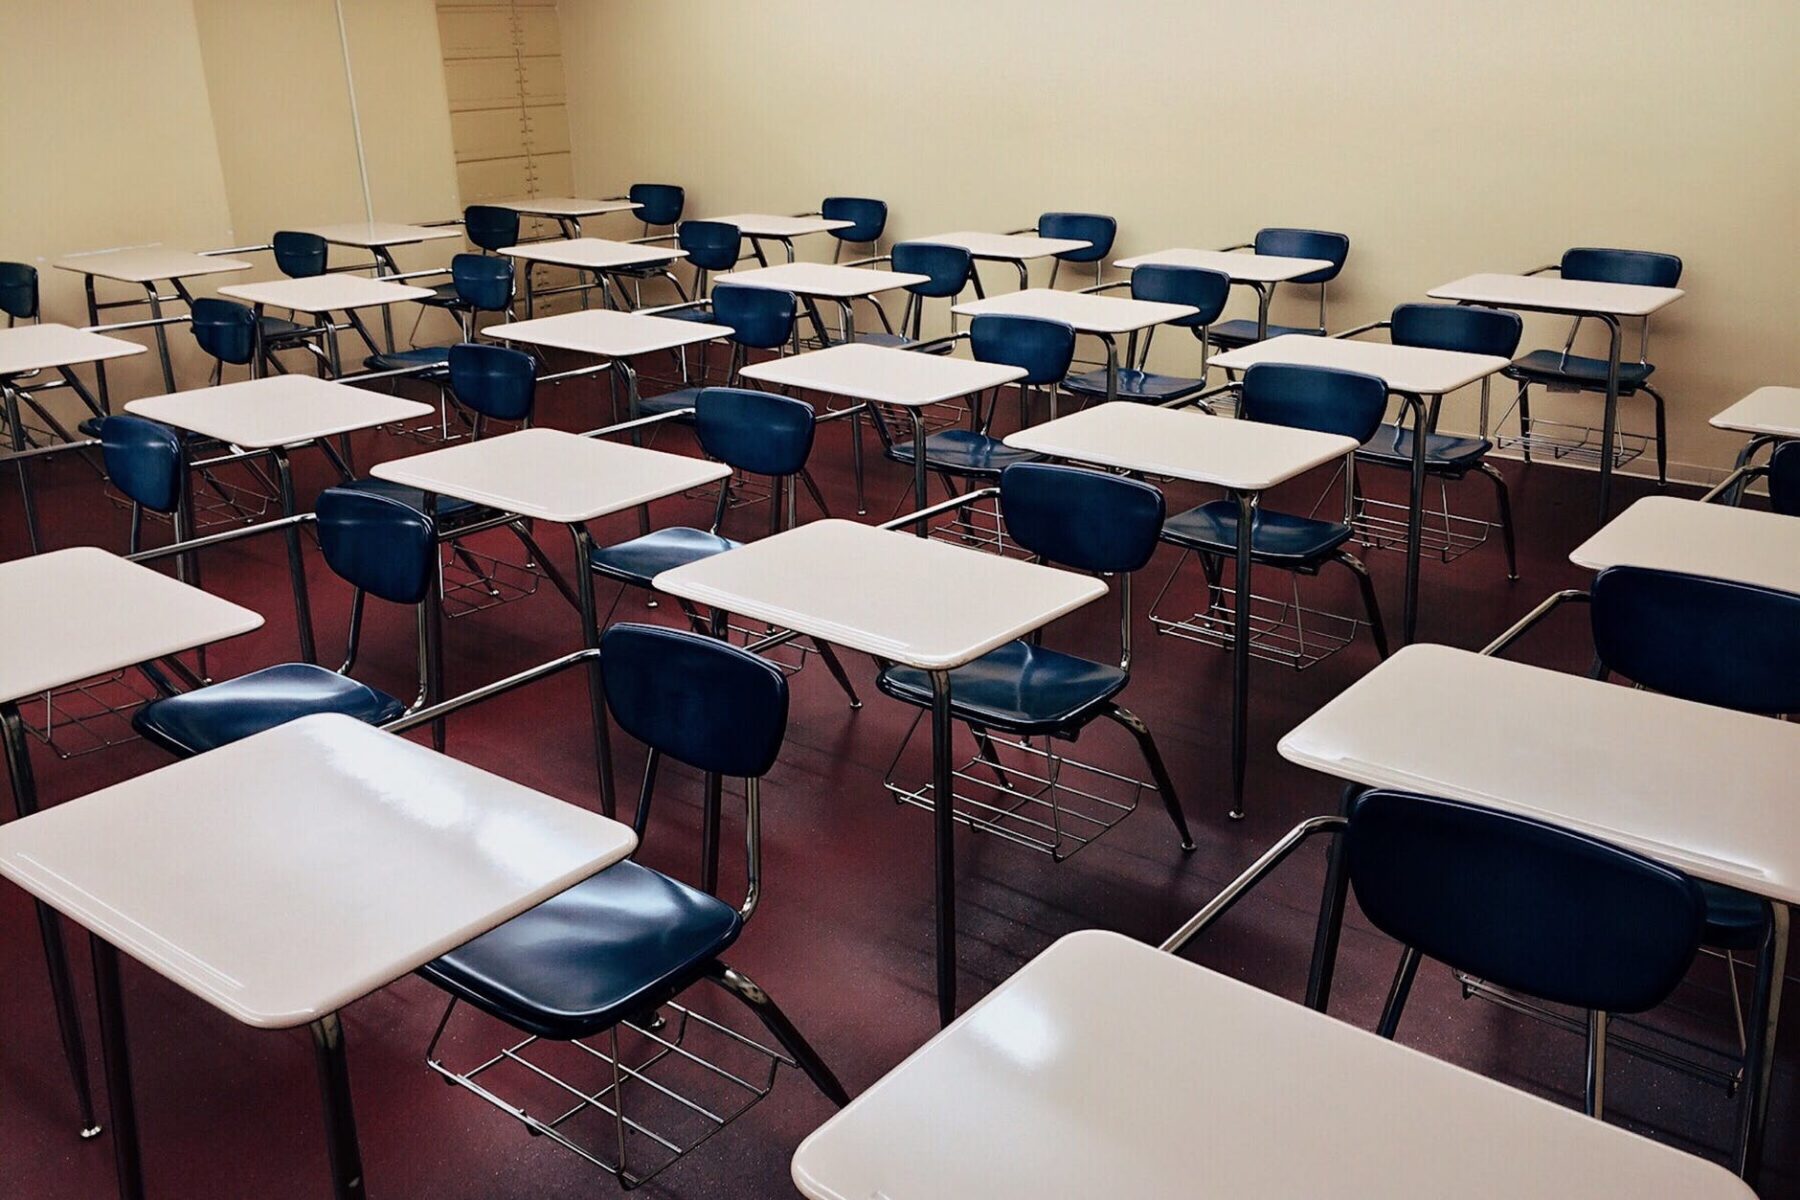 New York City public schools will have empty classrooms starting on Monday to slow the spread of COVID-19. Photo Courtesy of Pixabay from Pexels